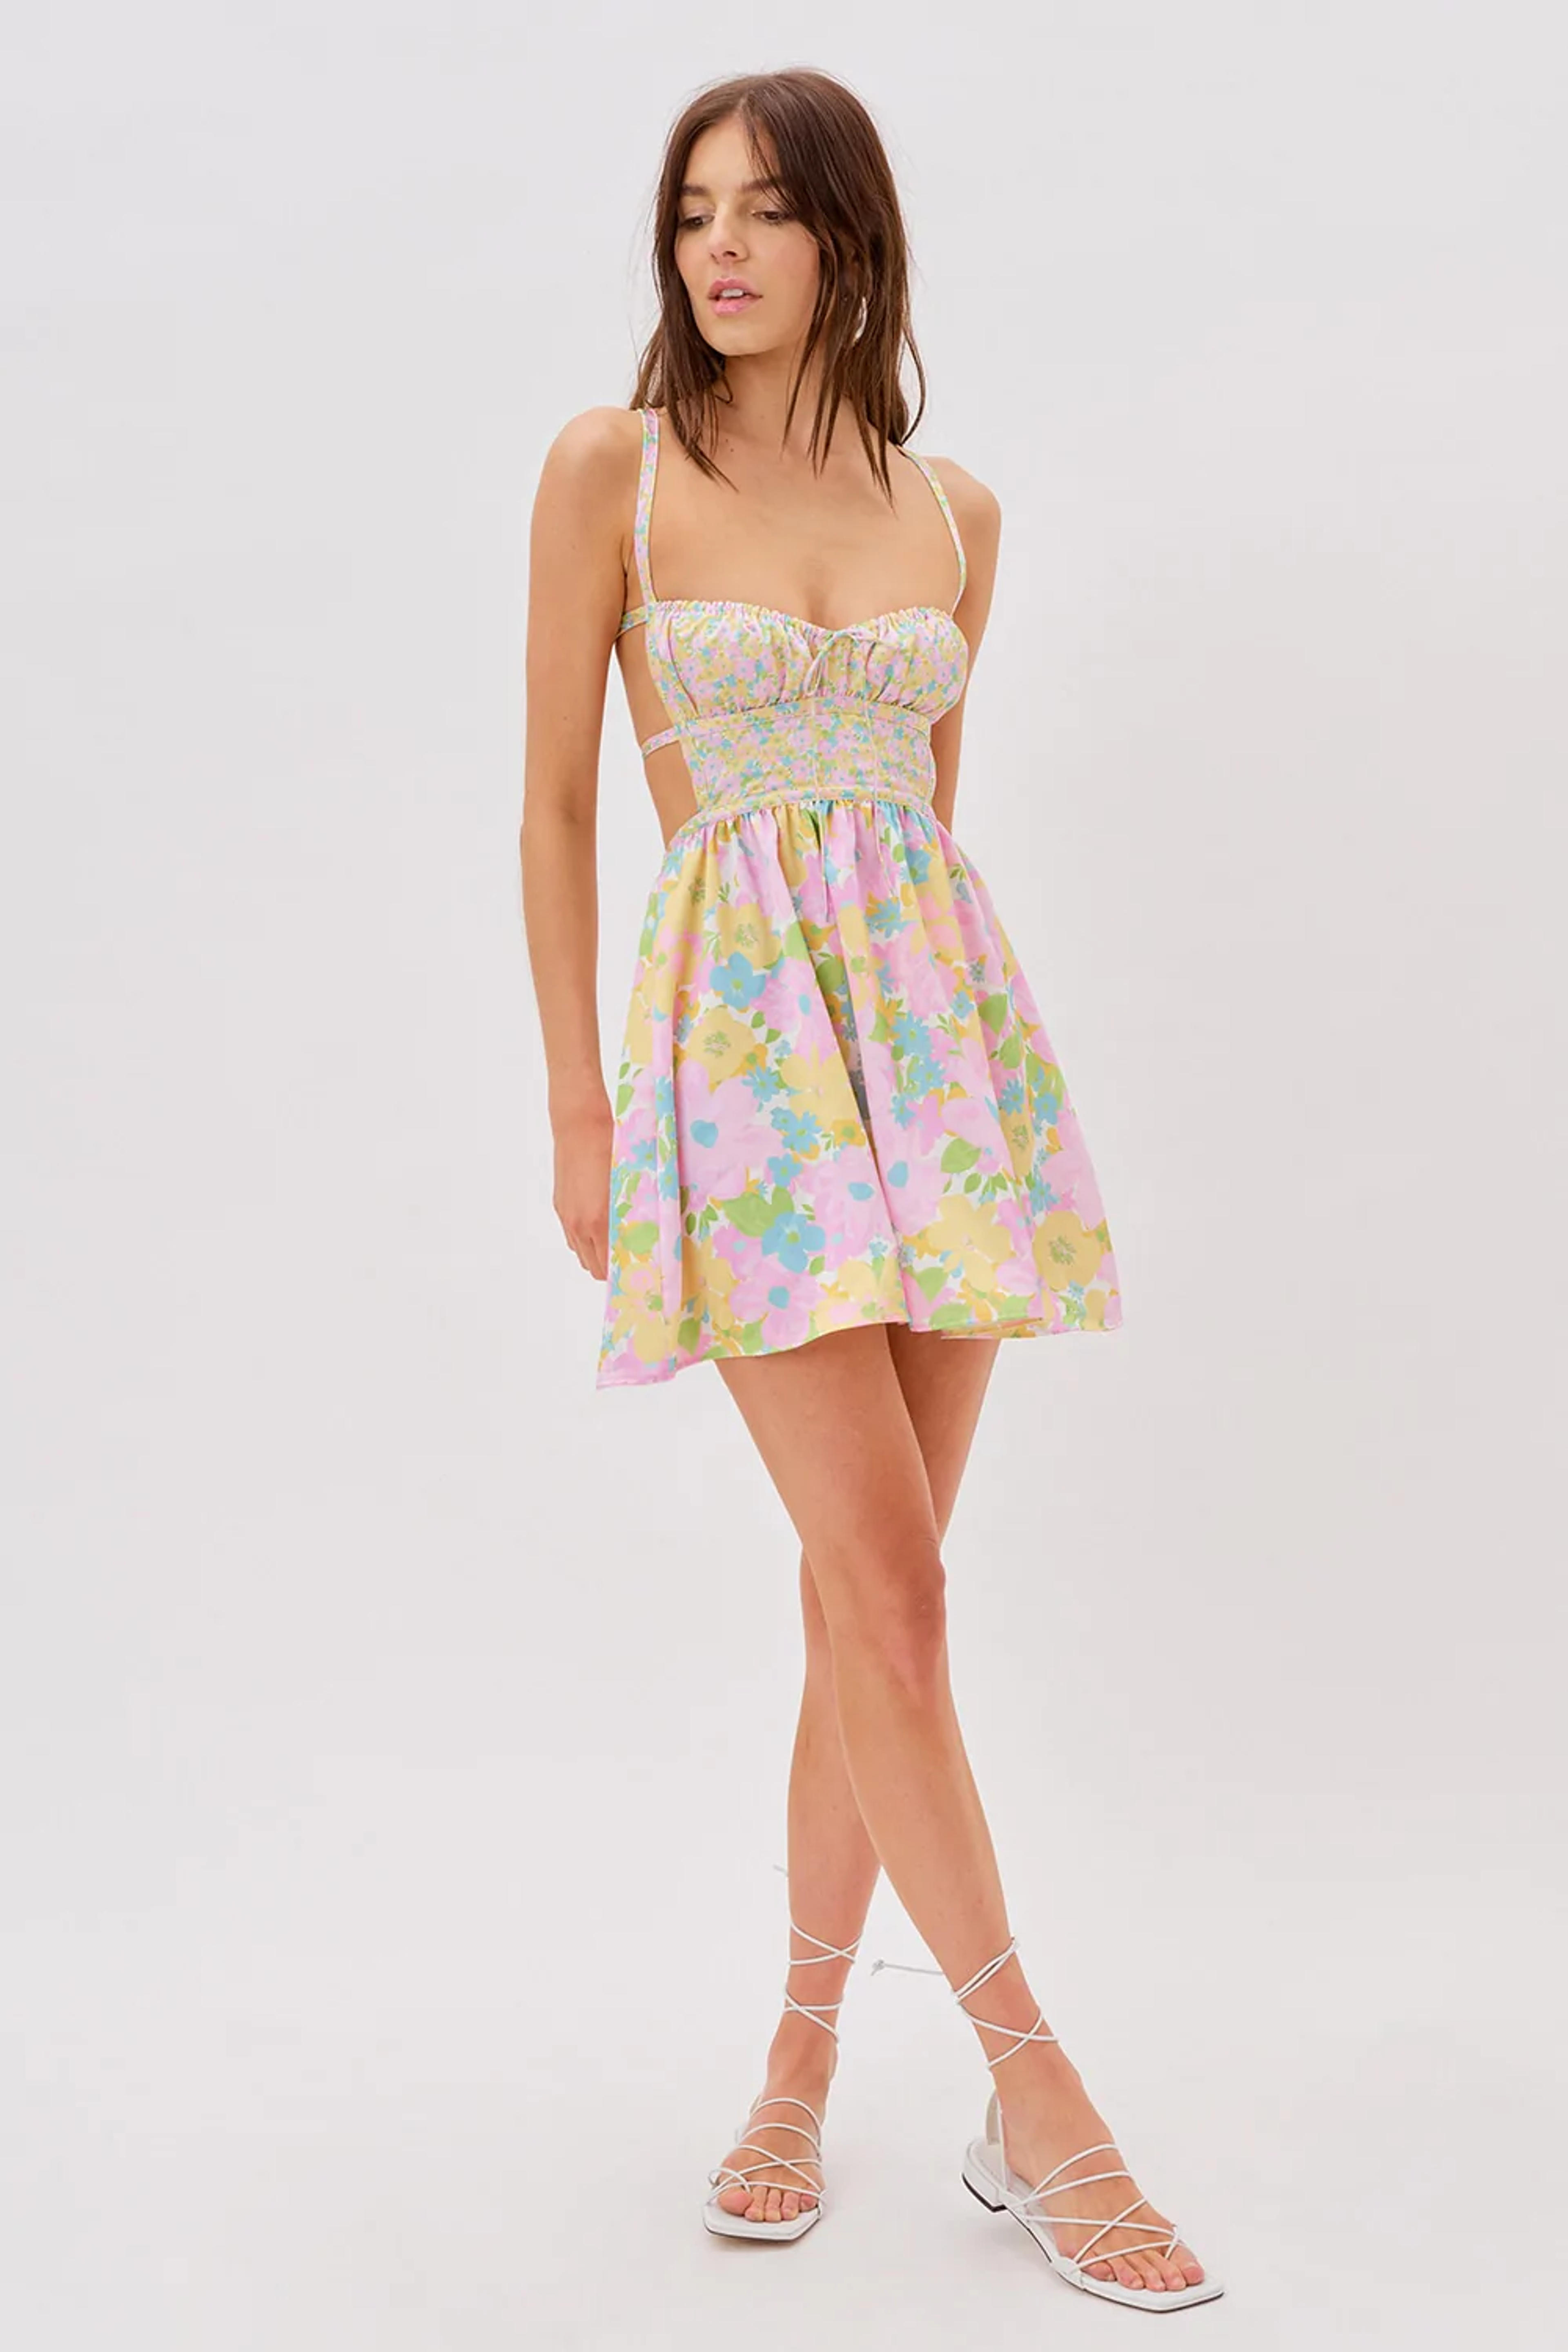 Emily Backless Dress - S / Pink